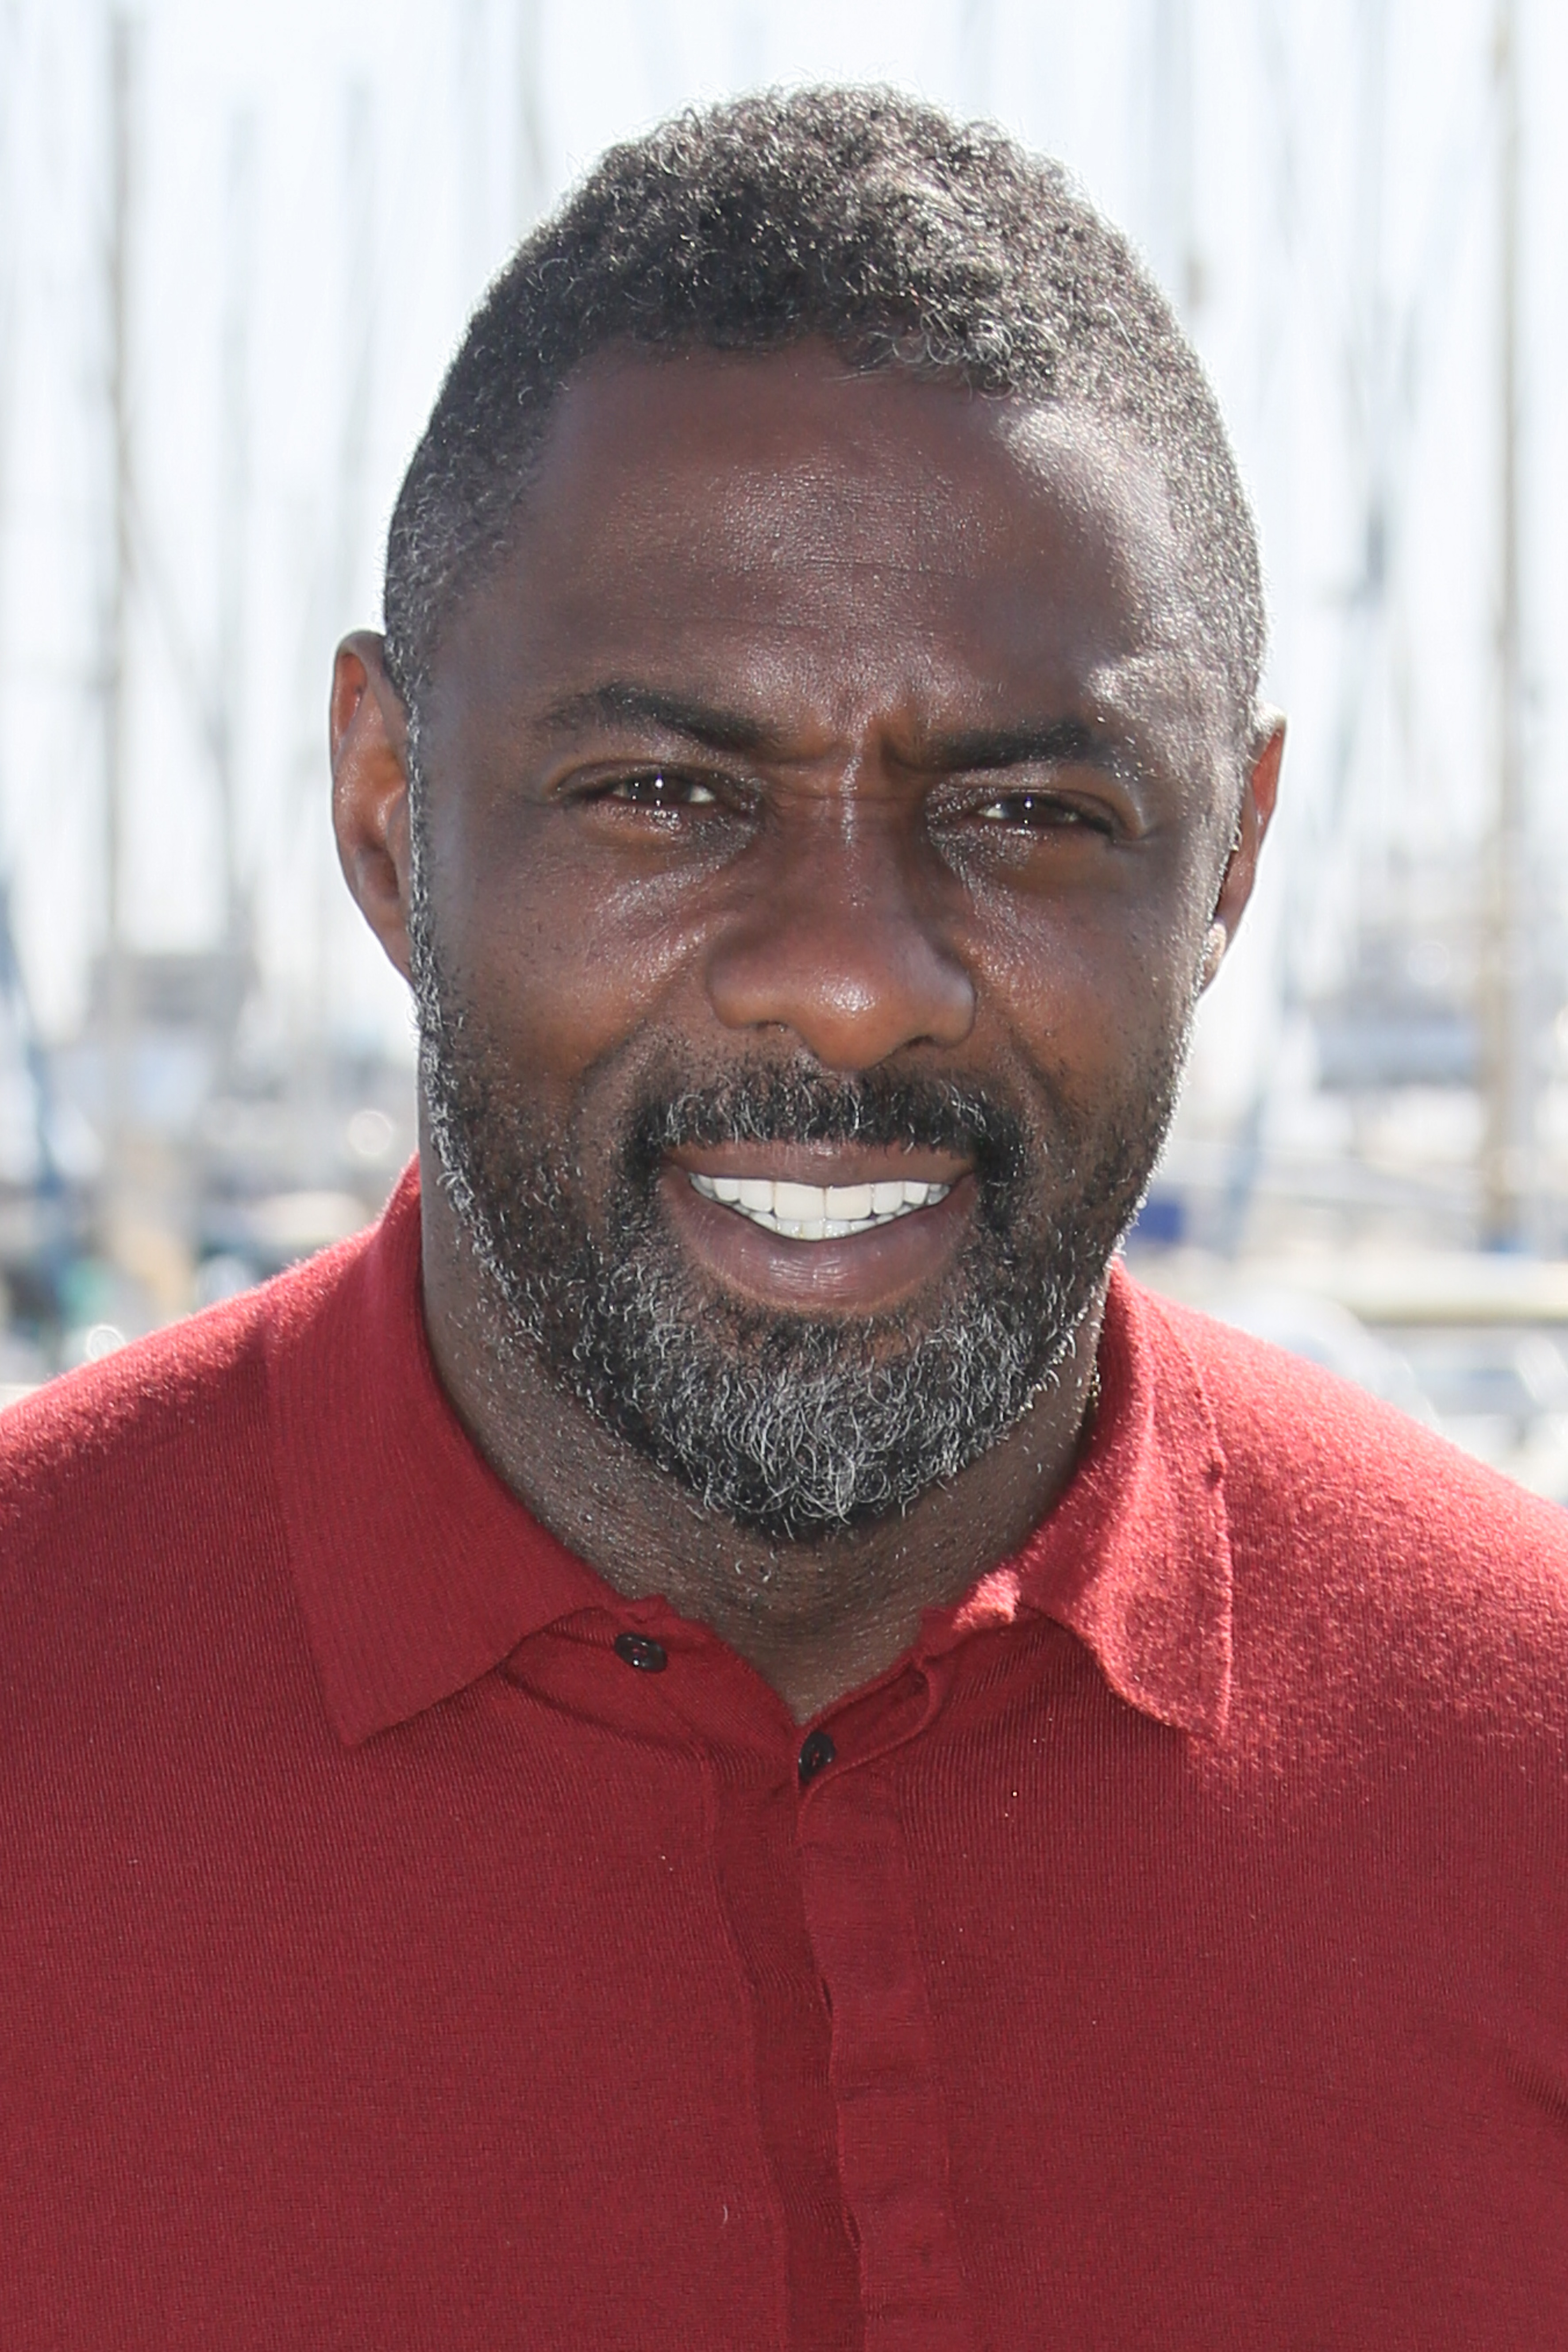 Idris Elba at "Mandela, My Dad And Me" photocall as part of MIPTV 2015 in Cannes, France on April 14, 2015.